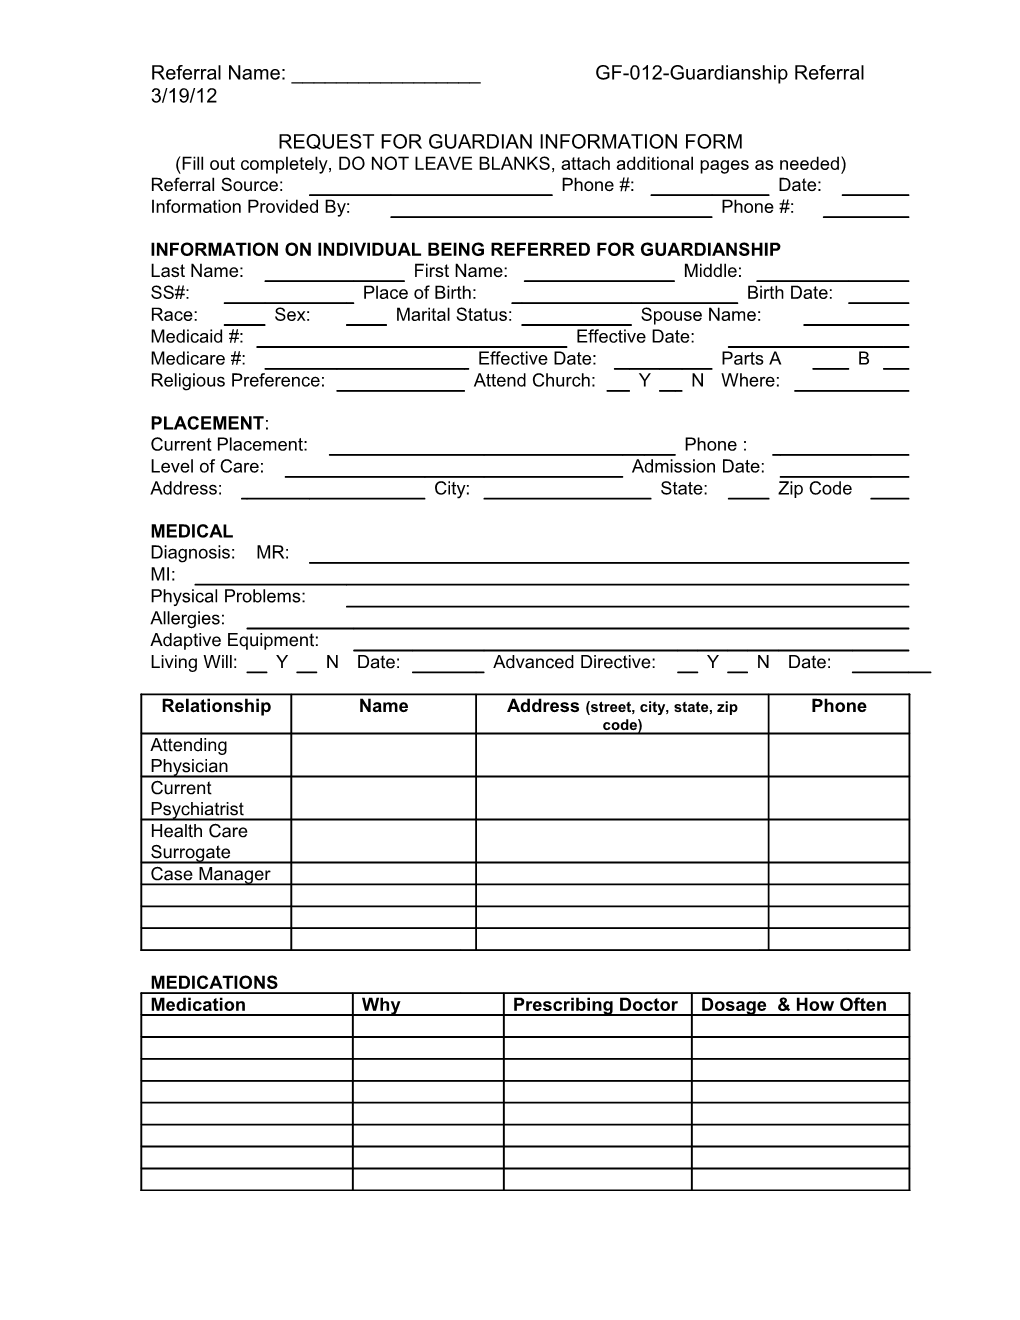 Request for Guardian Information Form